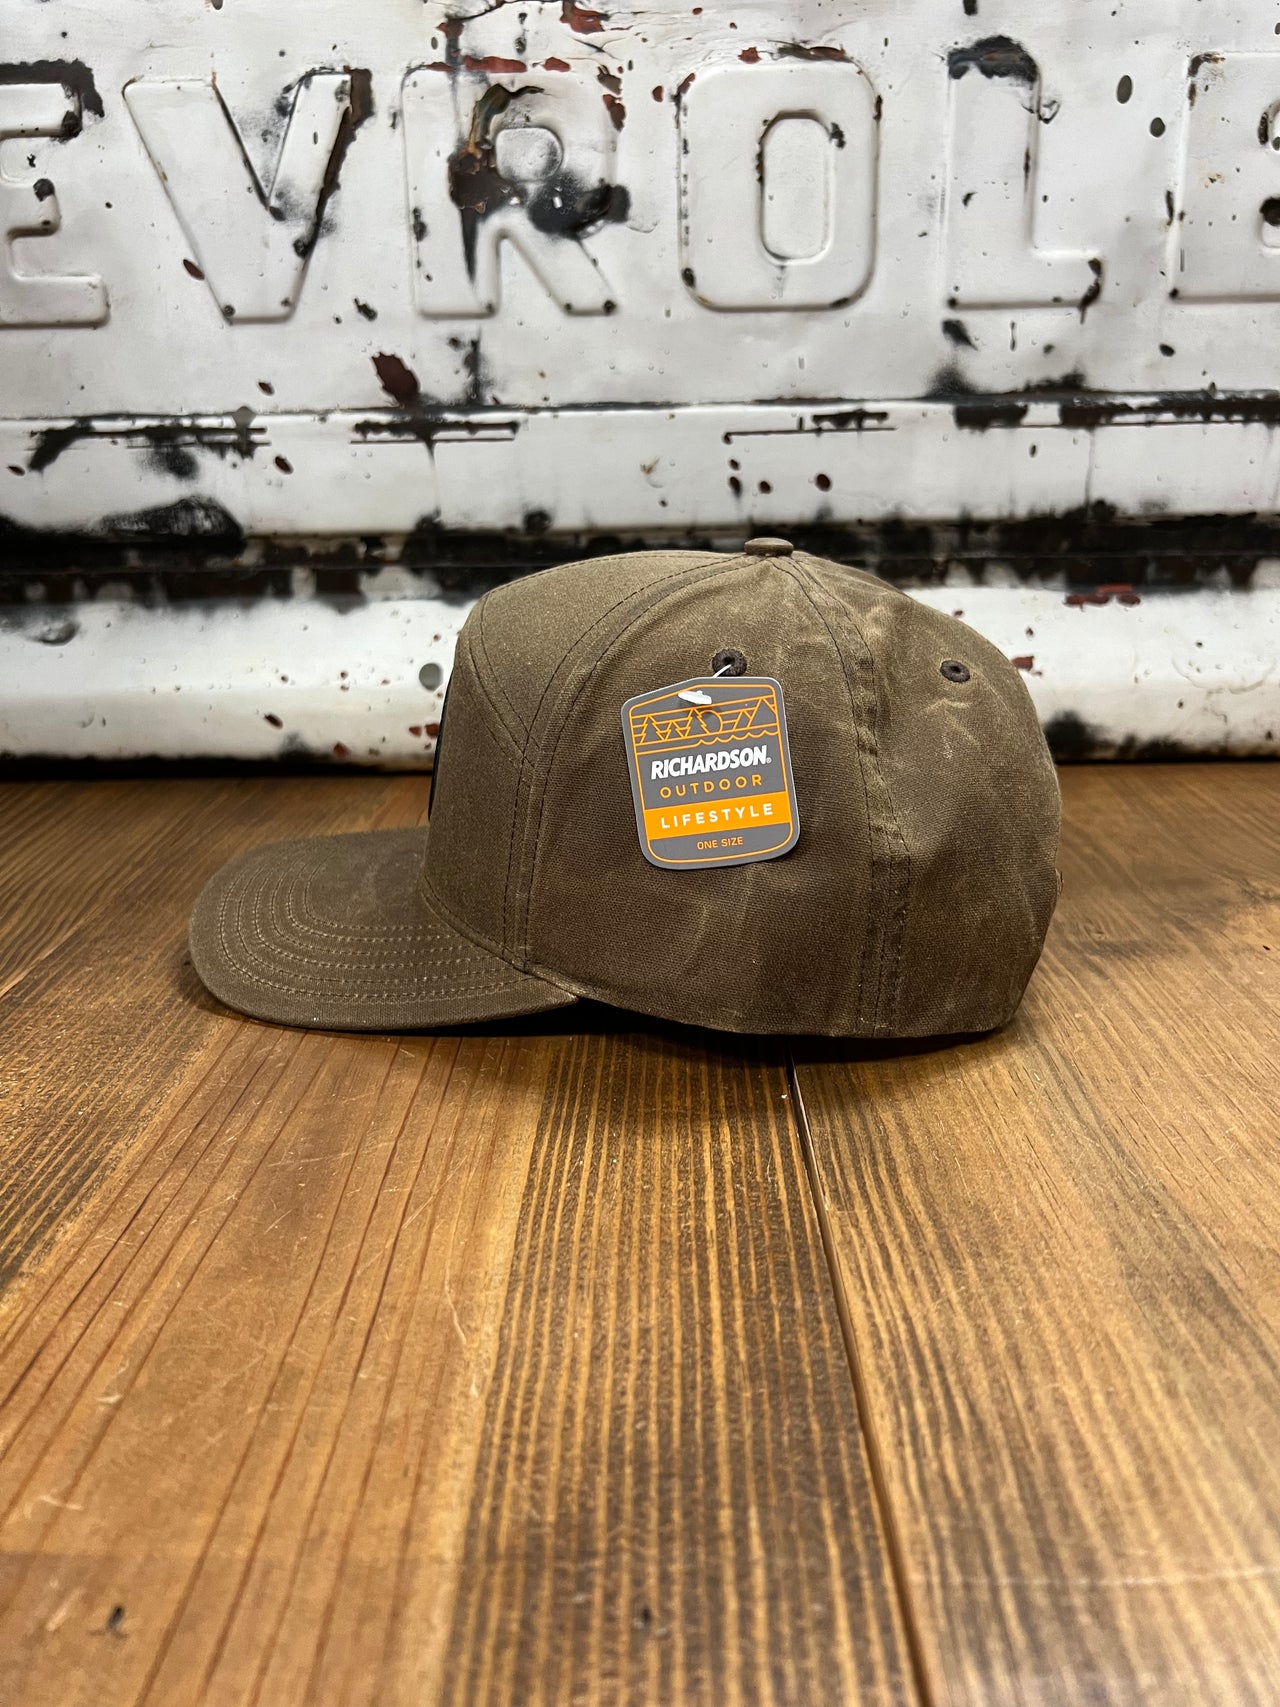 Home Bound Flying Duck Leather Patch Cap - Waxed Buck Brown